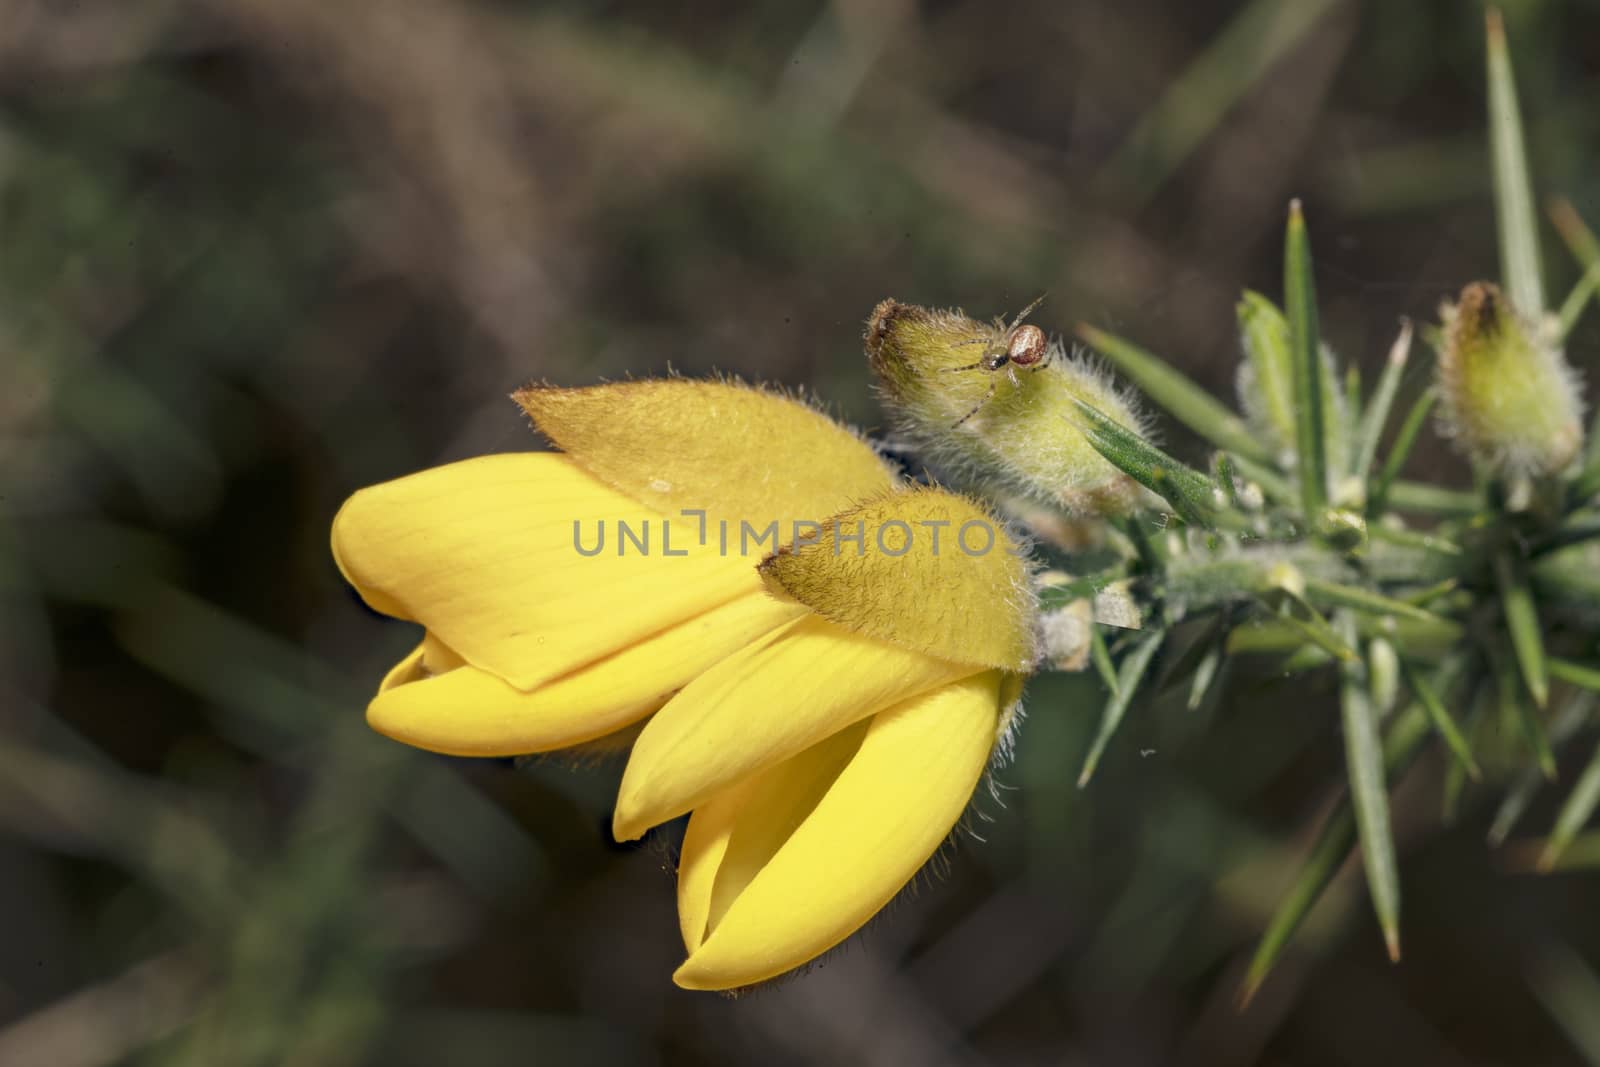 Ulex europaeus, yellow flowers close up with a little spider waiting to catch its prey by ankorlight